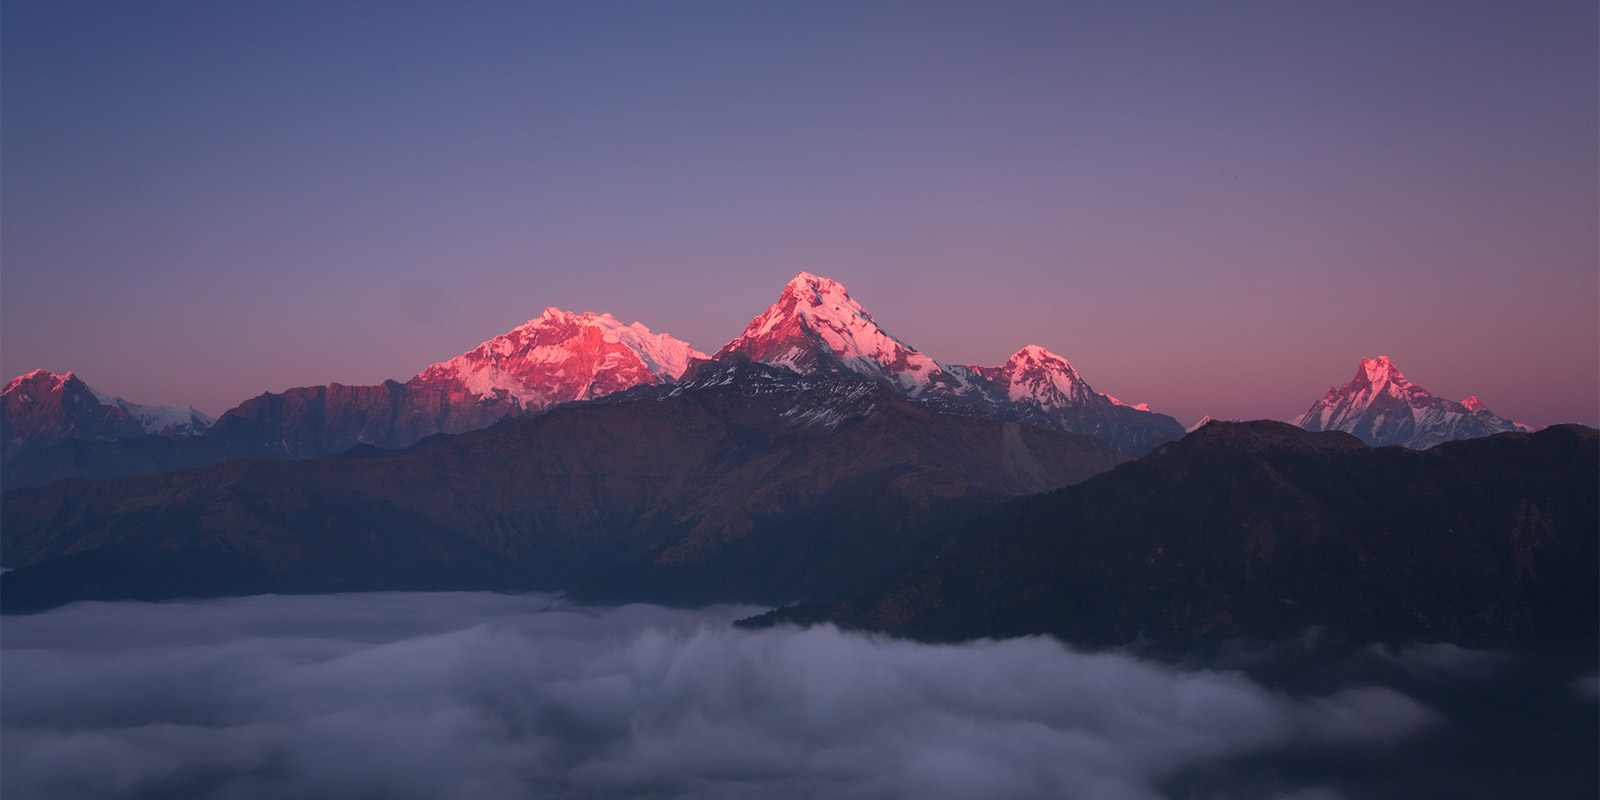 Annapurna from Poon Hill at sunset in Nepal